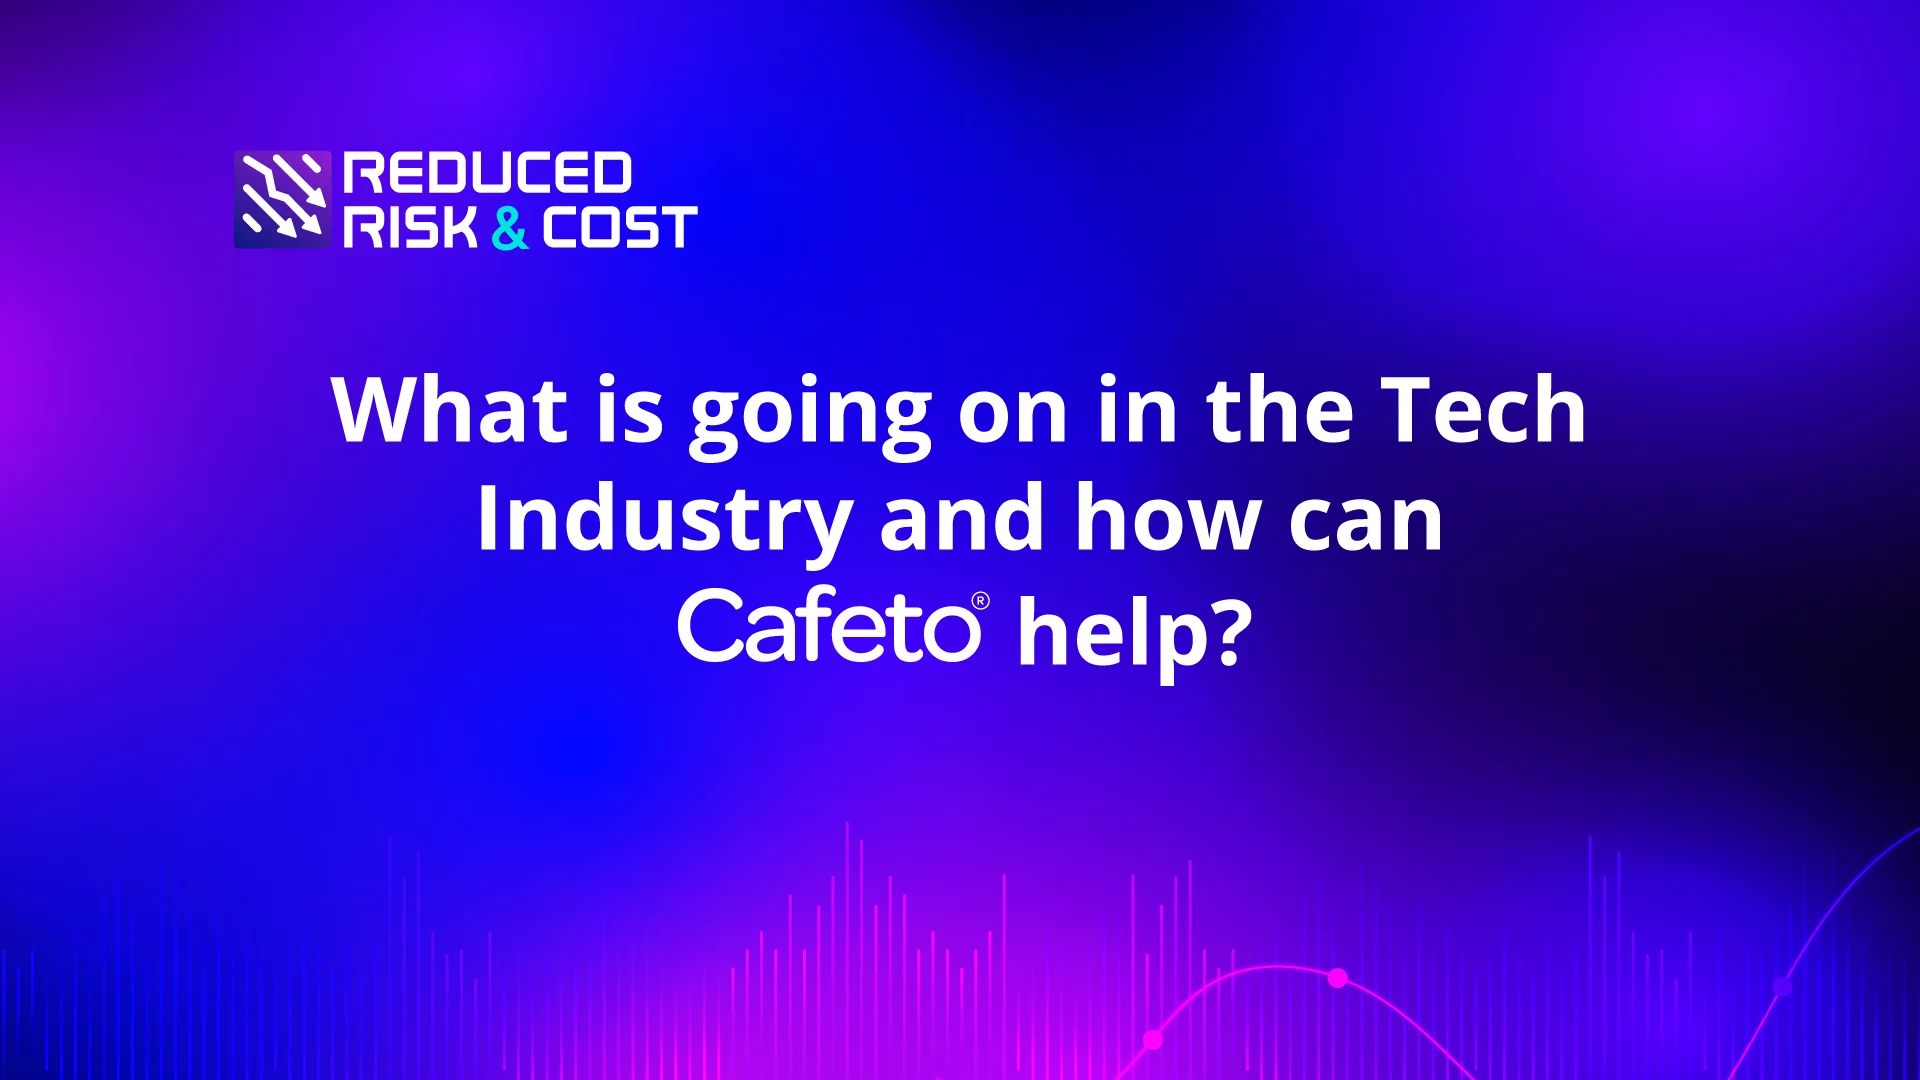 What is going on in the Tech Industry and how can Cafeto help?